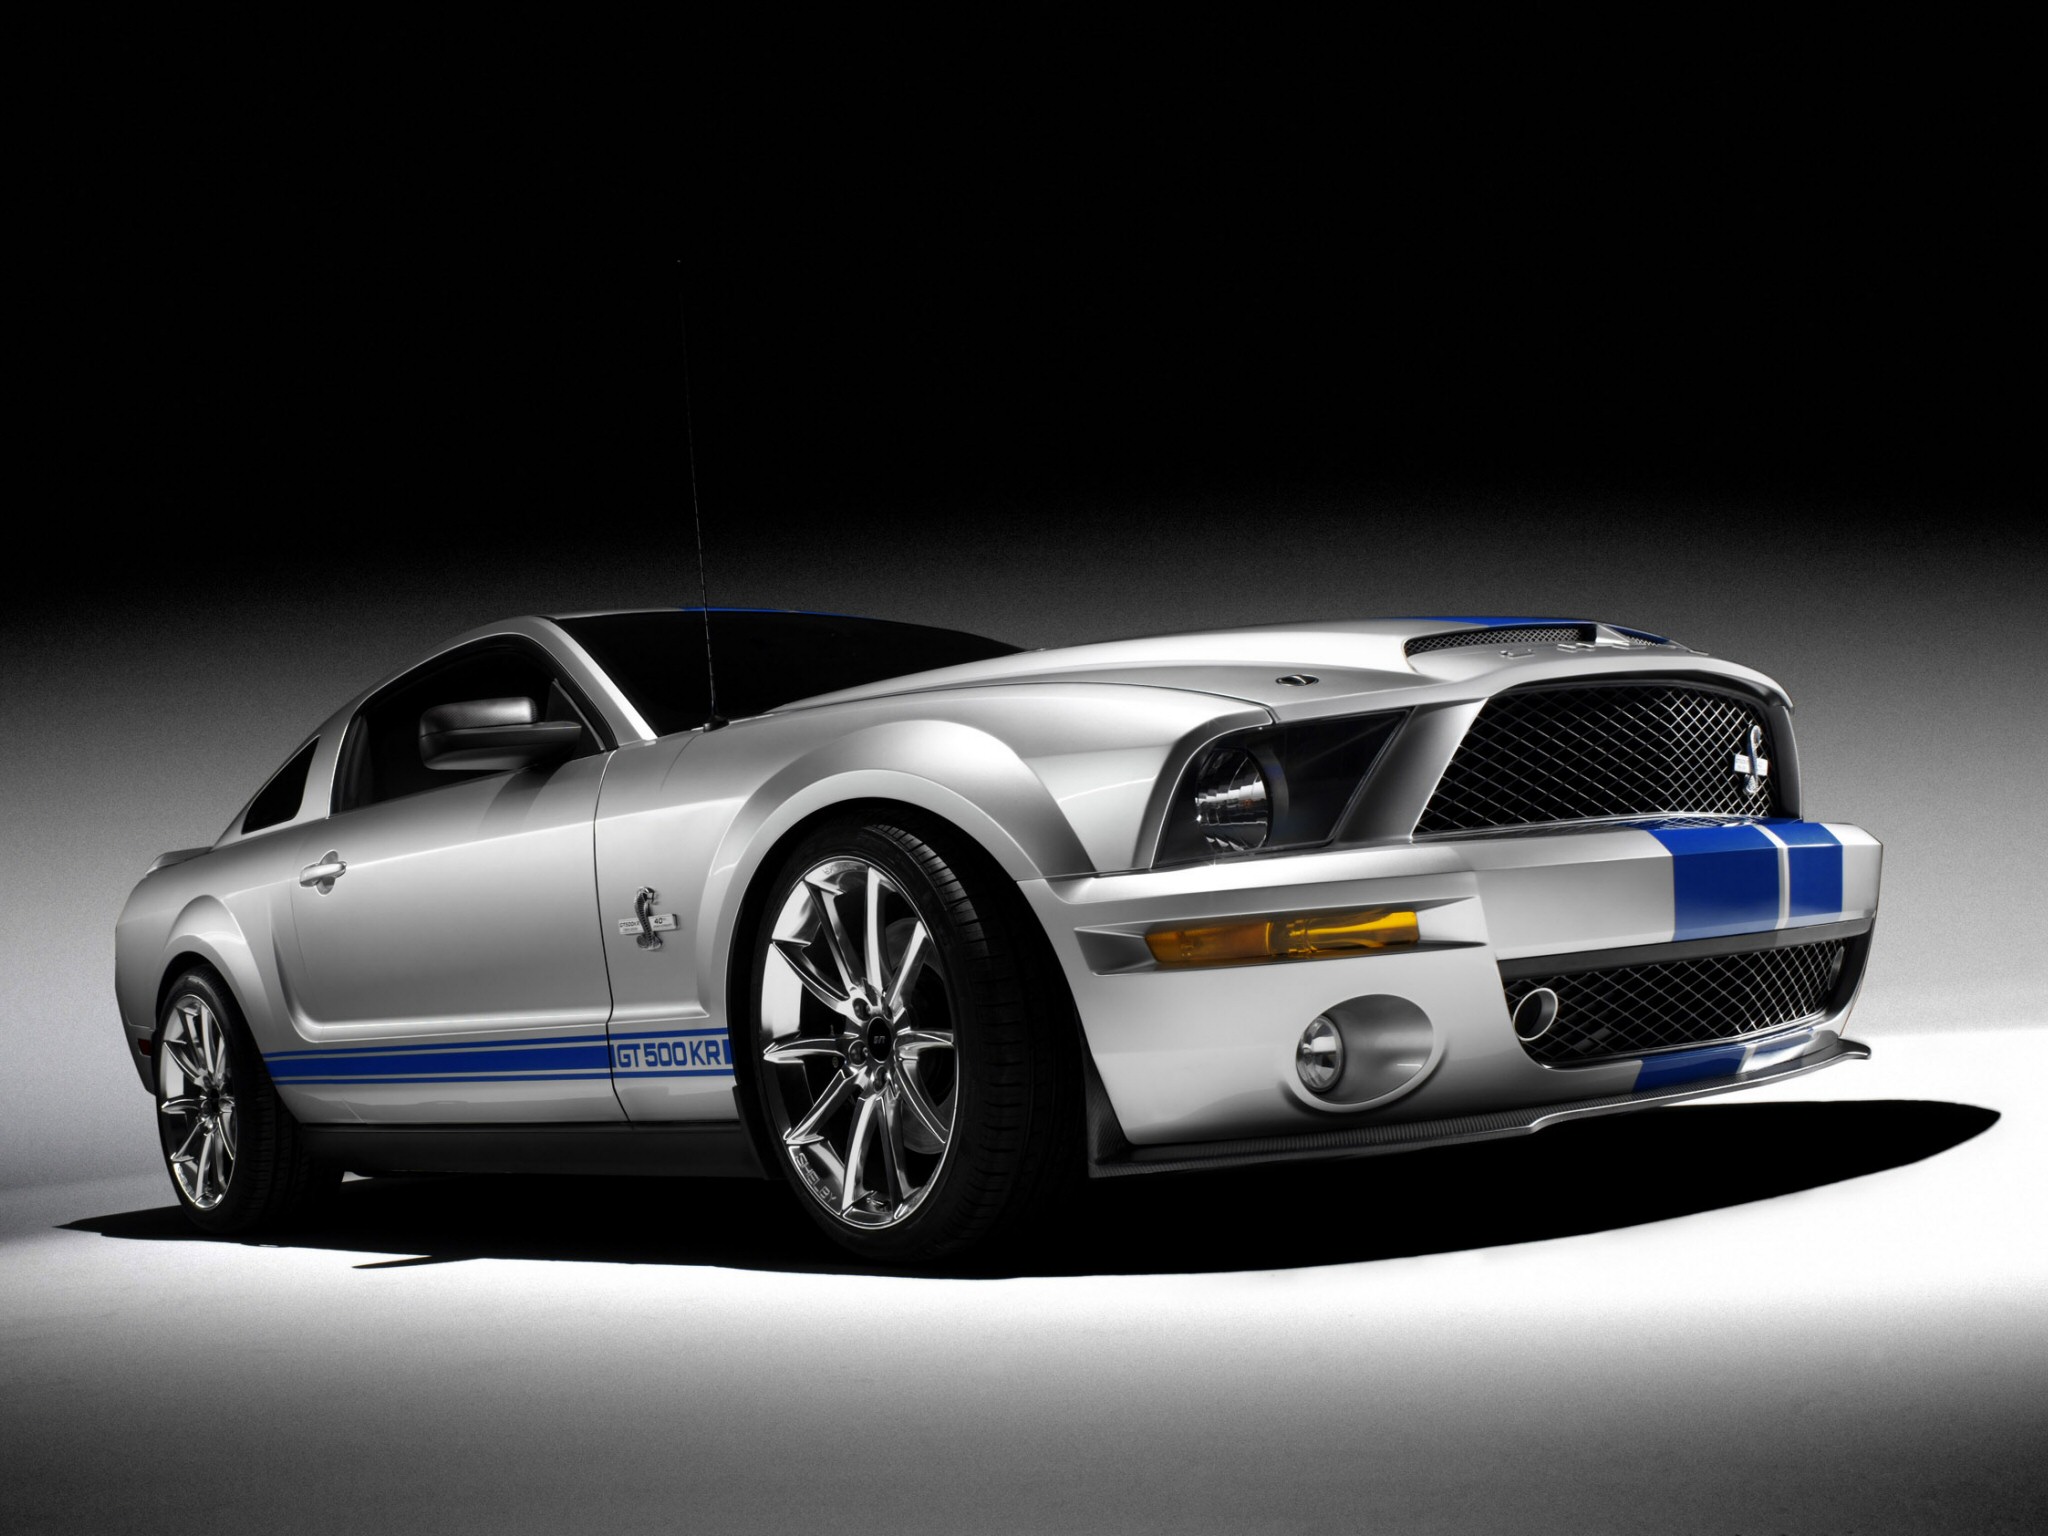 2008, Shelby, Gt500 kr, Gt500, Ford, Mustang, Muscle, Classic, Fe Wallpaper